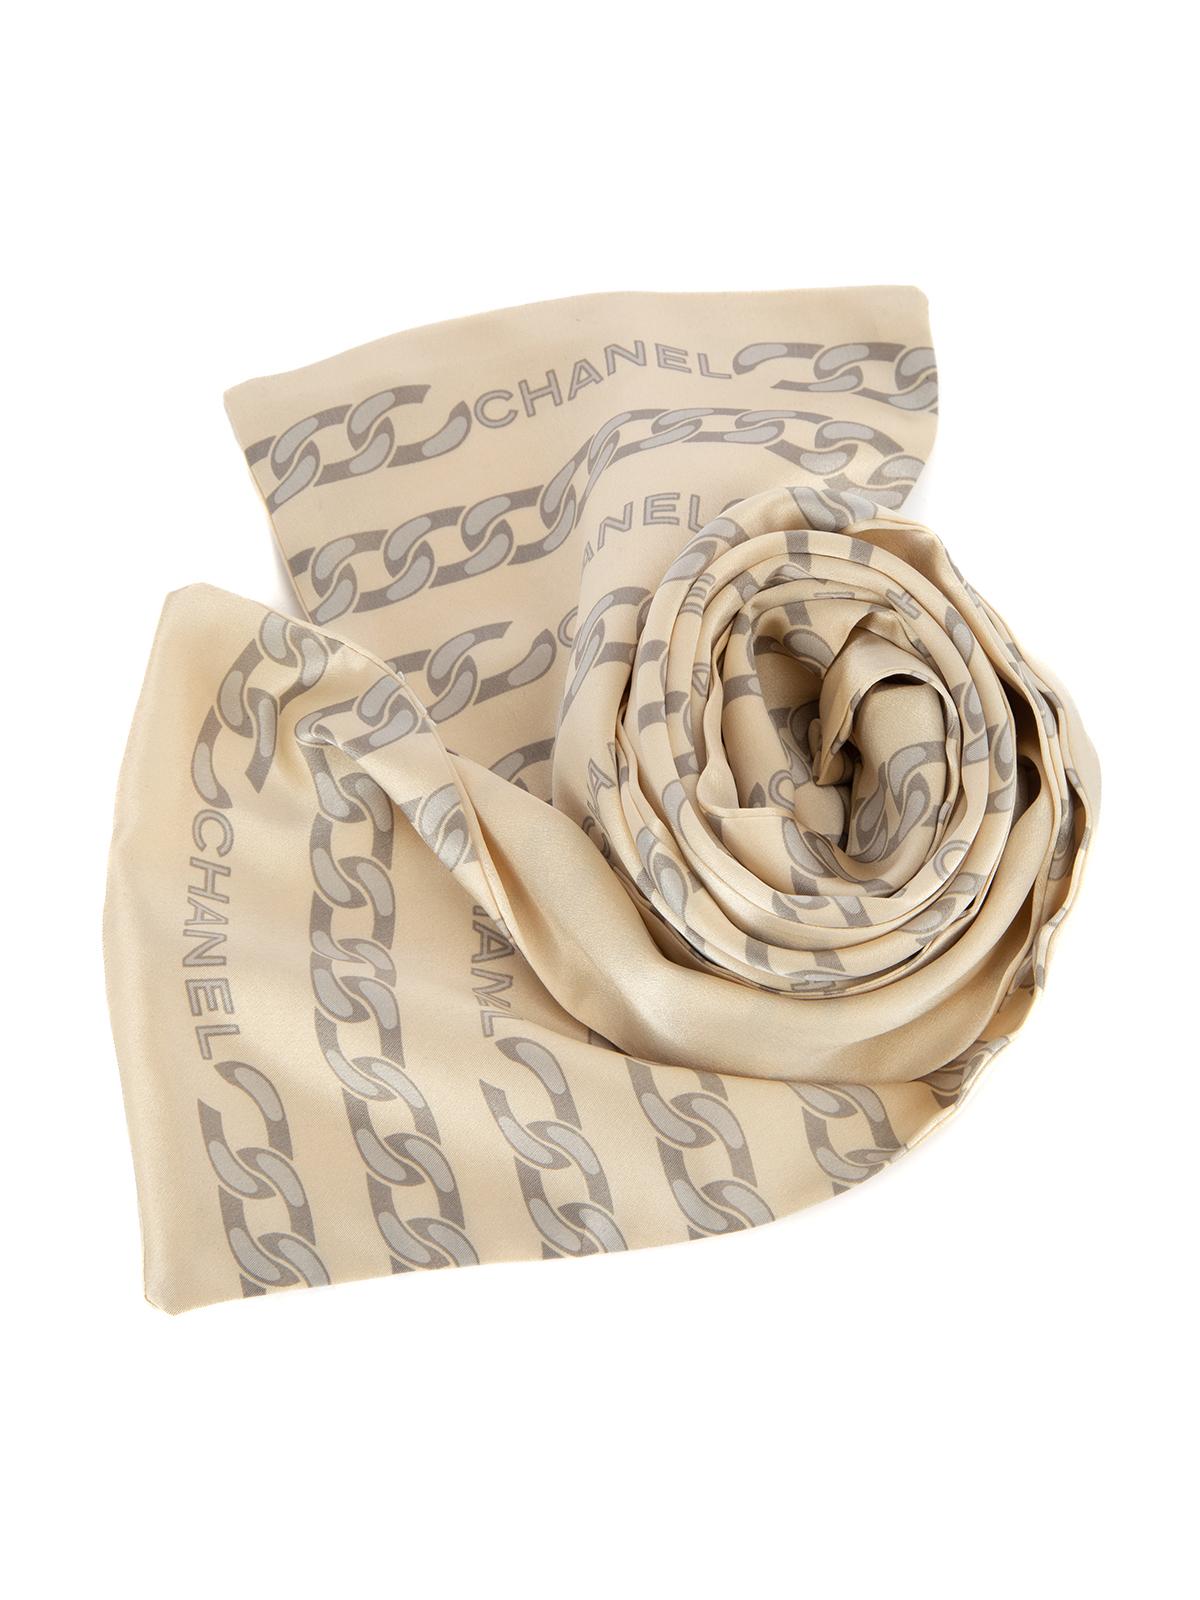 CONDITION is Very good. Minimal wear to scarf is evident. There is a very tiny stain on this used Chanel designer resale item.   Details  Cream Silk Scarf Grey chains pattern with Chanel logo   Made in Italy   Composition 100% Silk Care